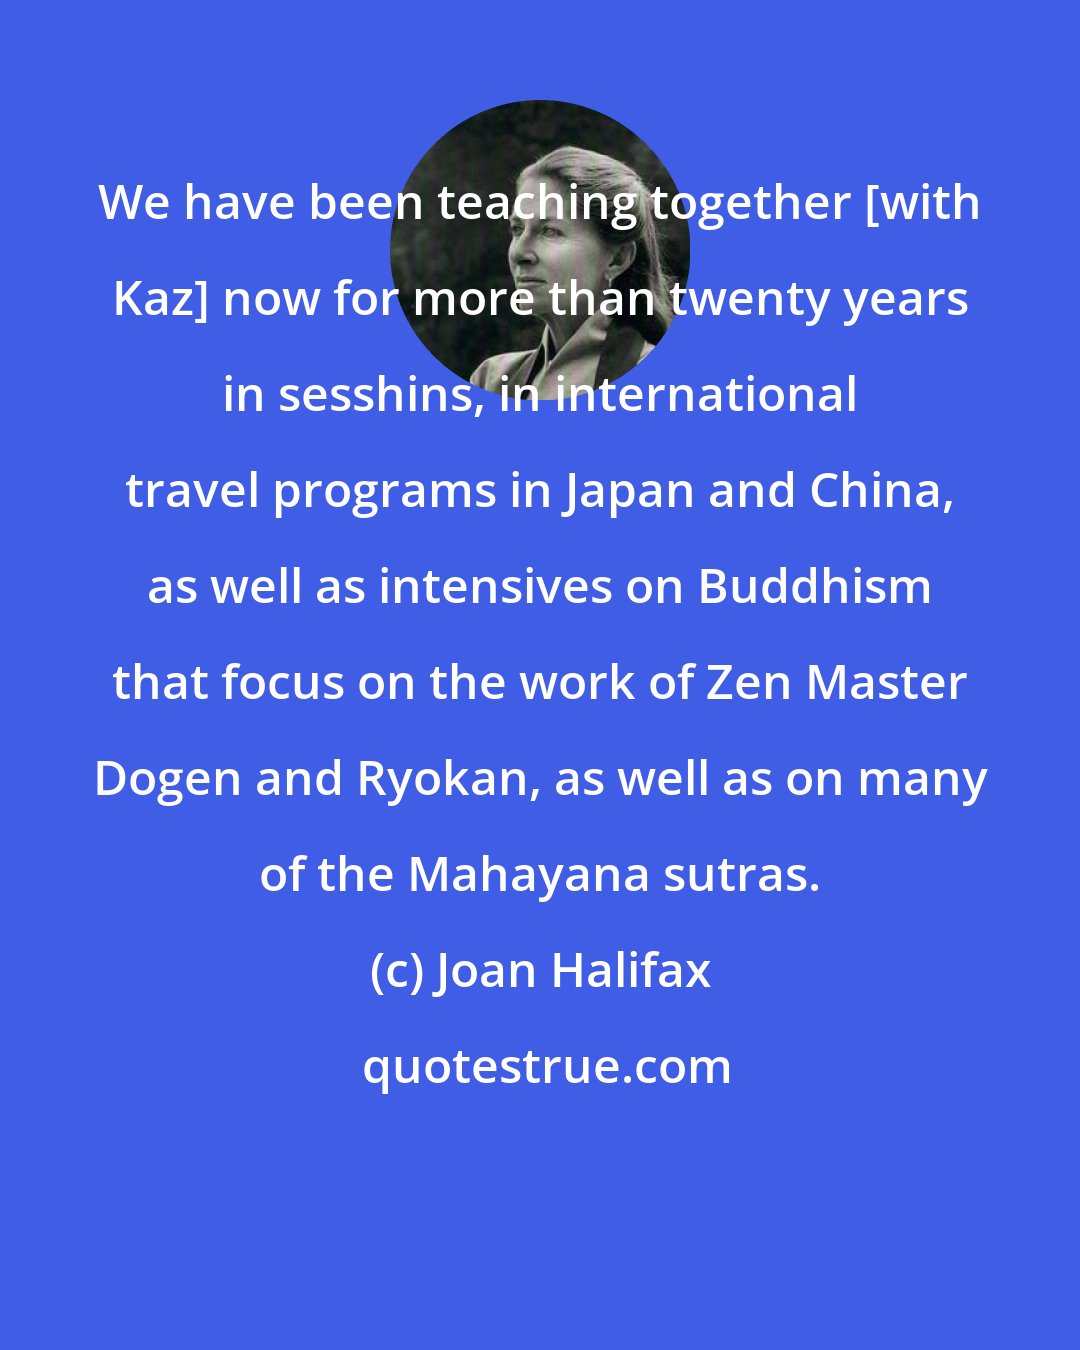 Joan Halifax: We have been teaching together [with Kaz] now for more than twenty years in sesshins, in international travel programs in Japan and China, as well as intensives on Buddhism that focus on the work of Zen Master Dogen and Ryokan, as well as on many of the Mahayana sutras.